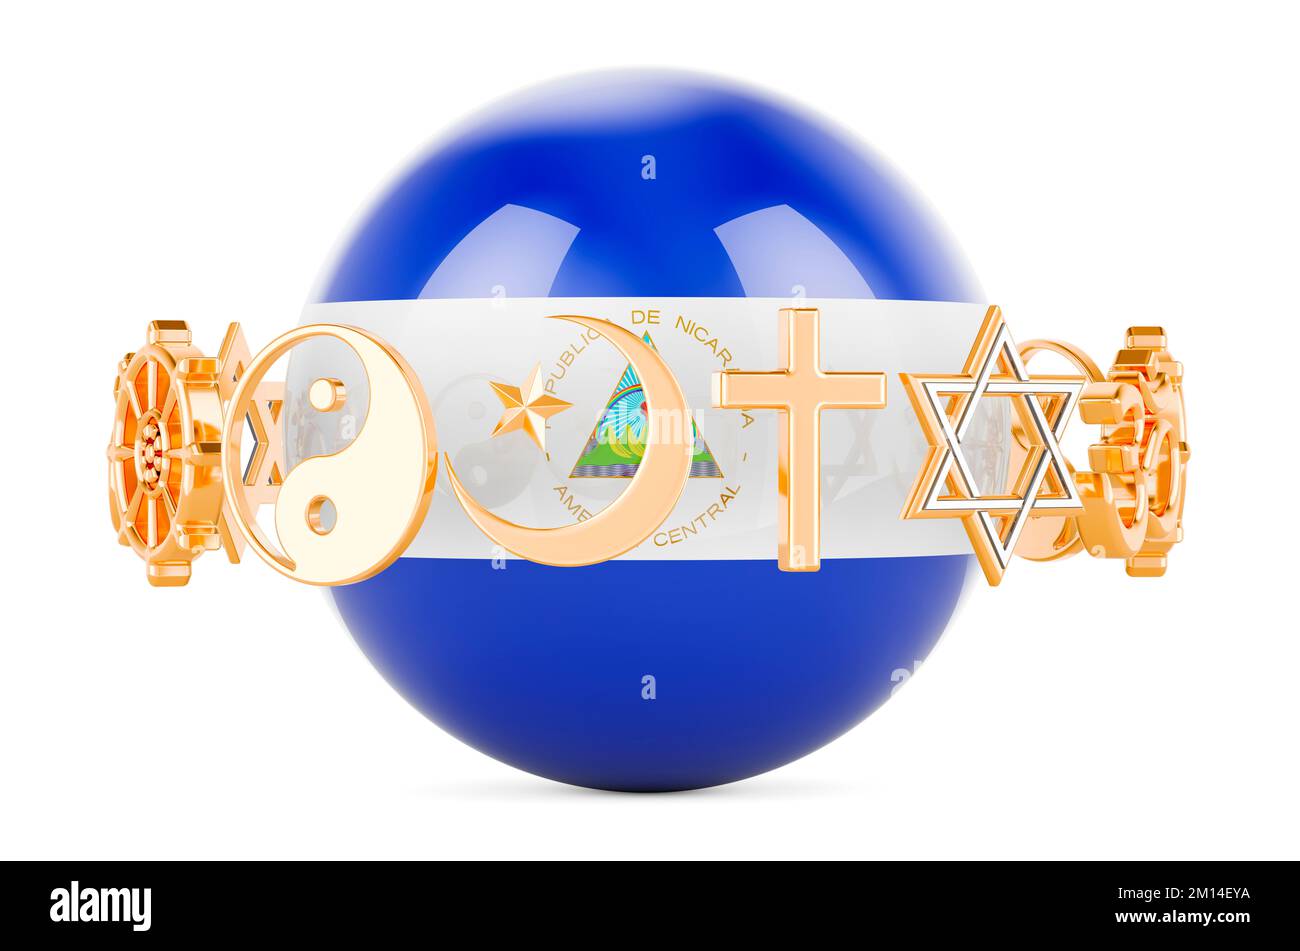 Nicaraguan flag painted on sphere with religions symbols around, 3D rendering isolated on white background Stock Photo